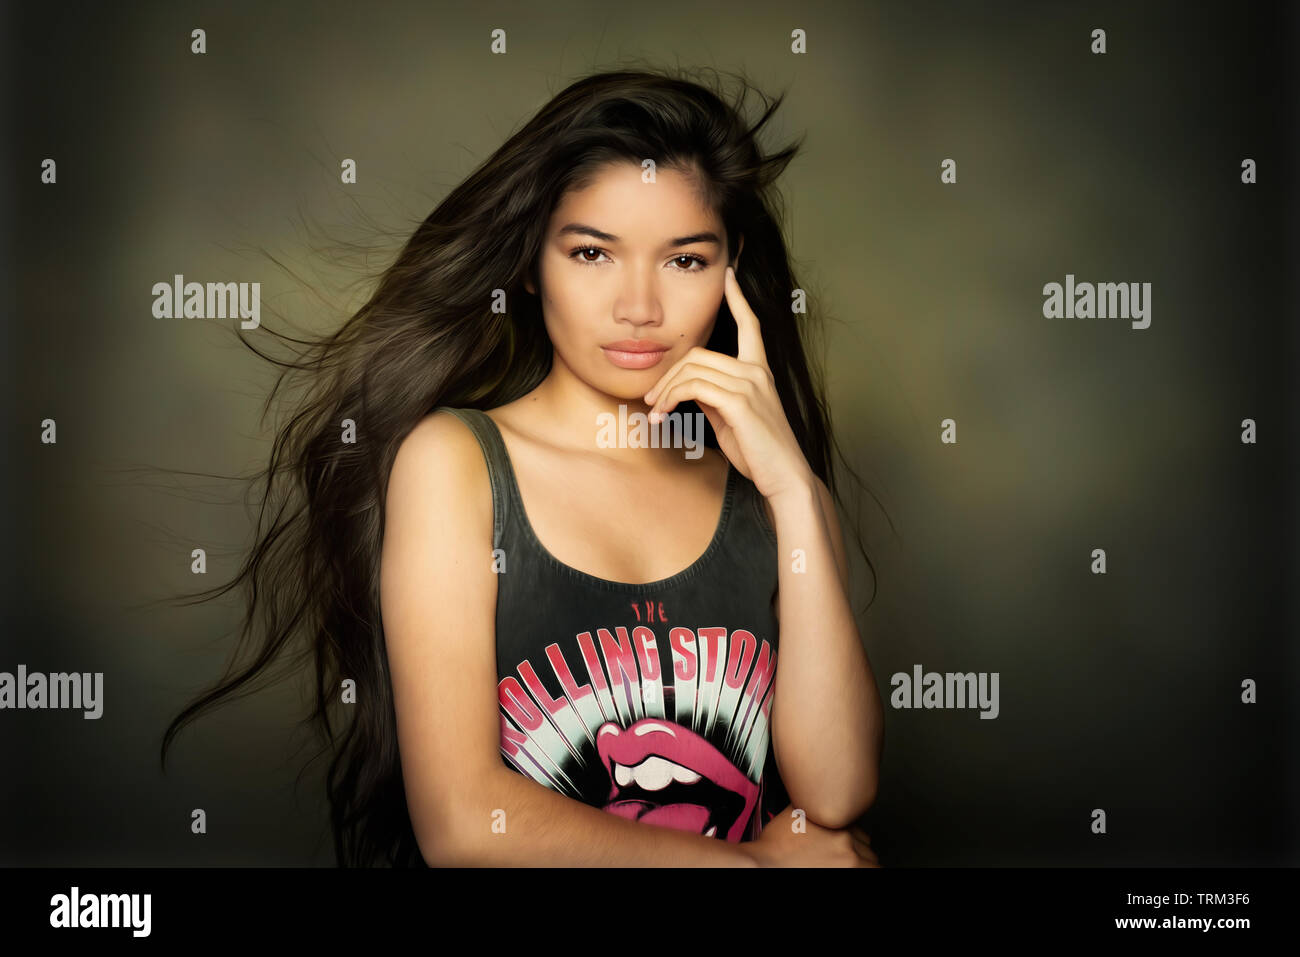 Young pretty woman with long hair Stock Photo